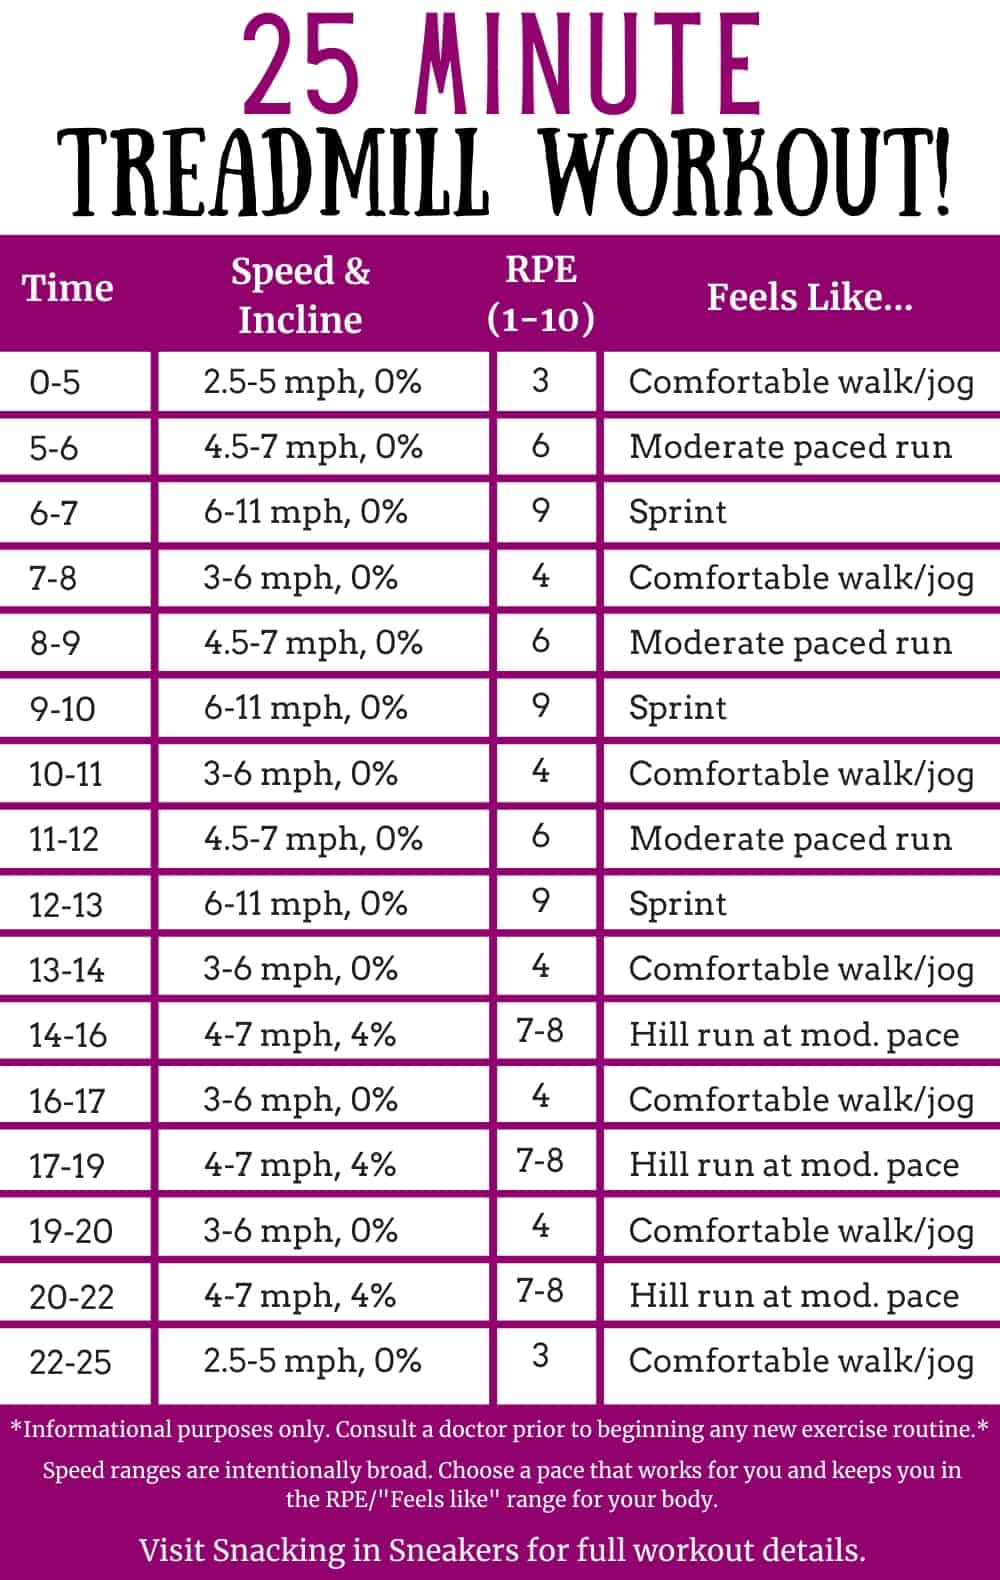 A 25 minute treadmill workout in chart form.